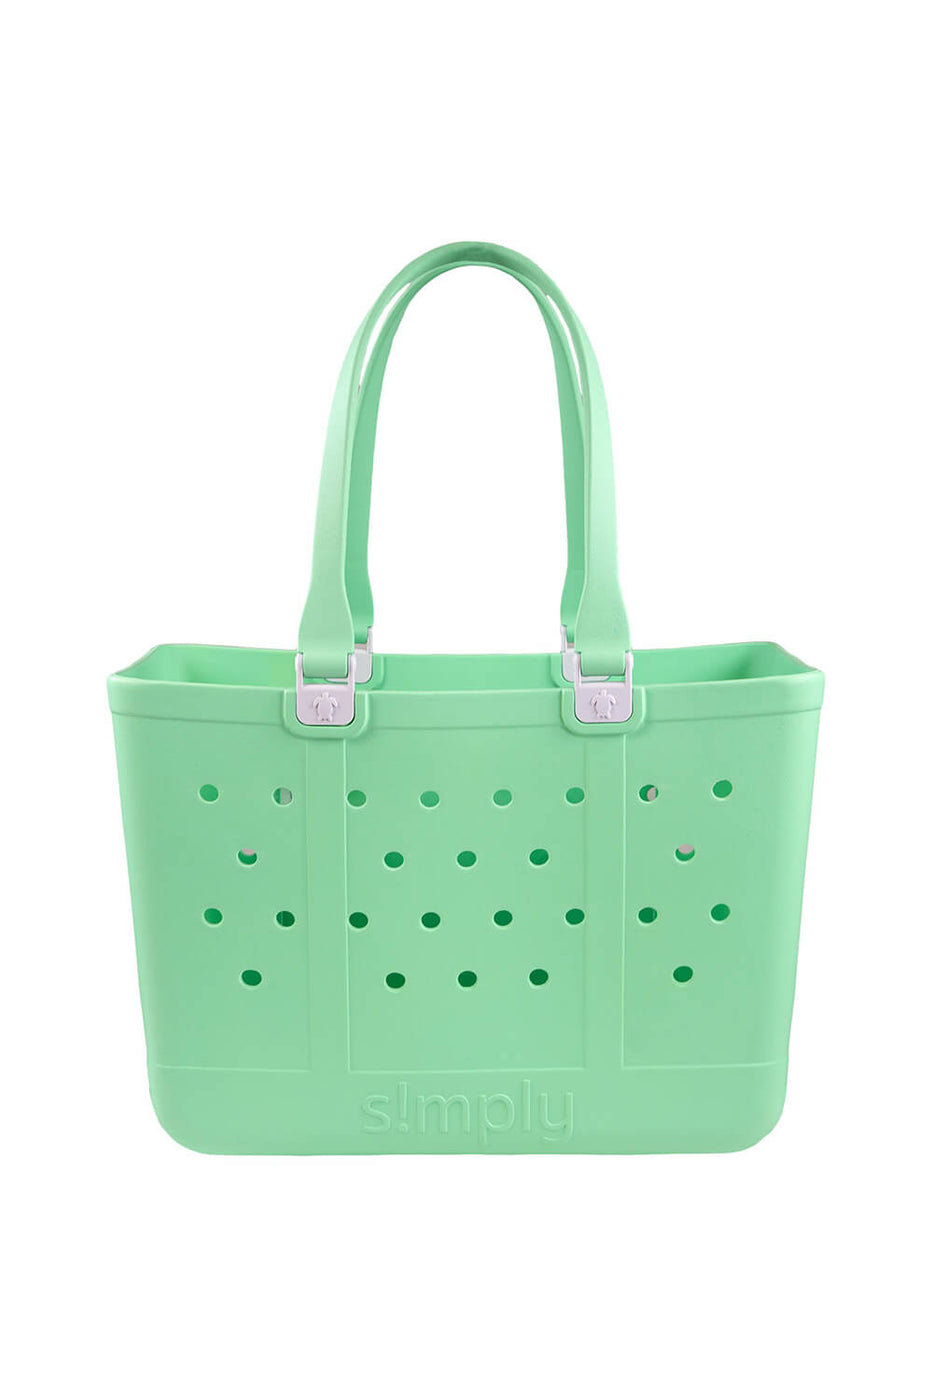 Simply Southern Utility Tote--BoggType Bag – Lilly Abigails Boutique